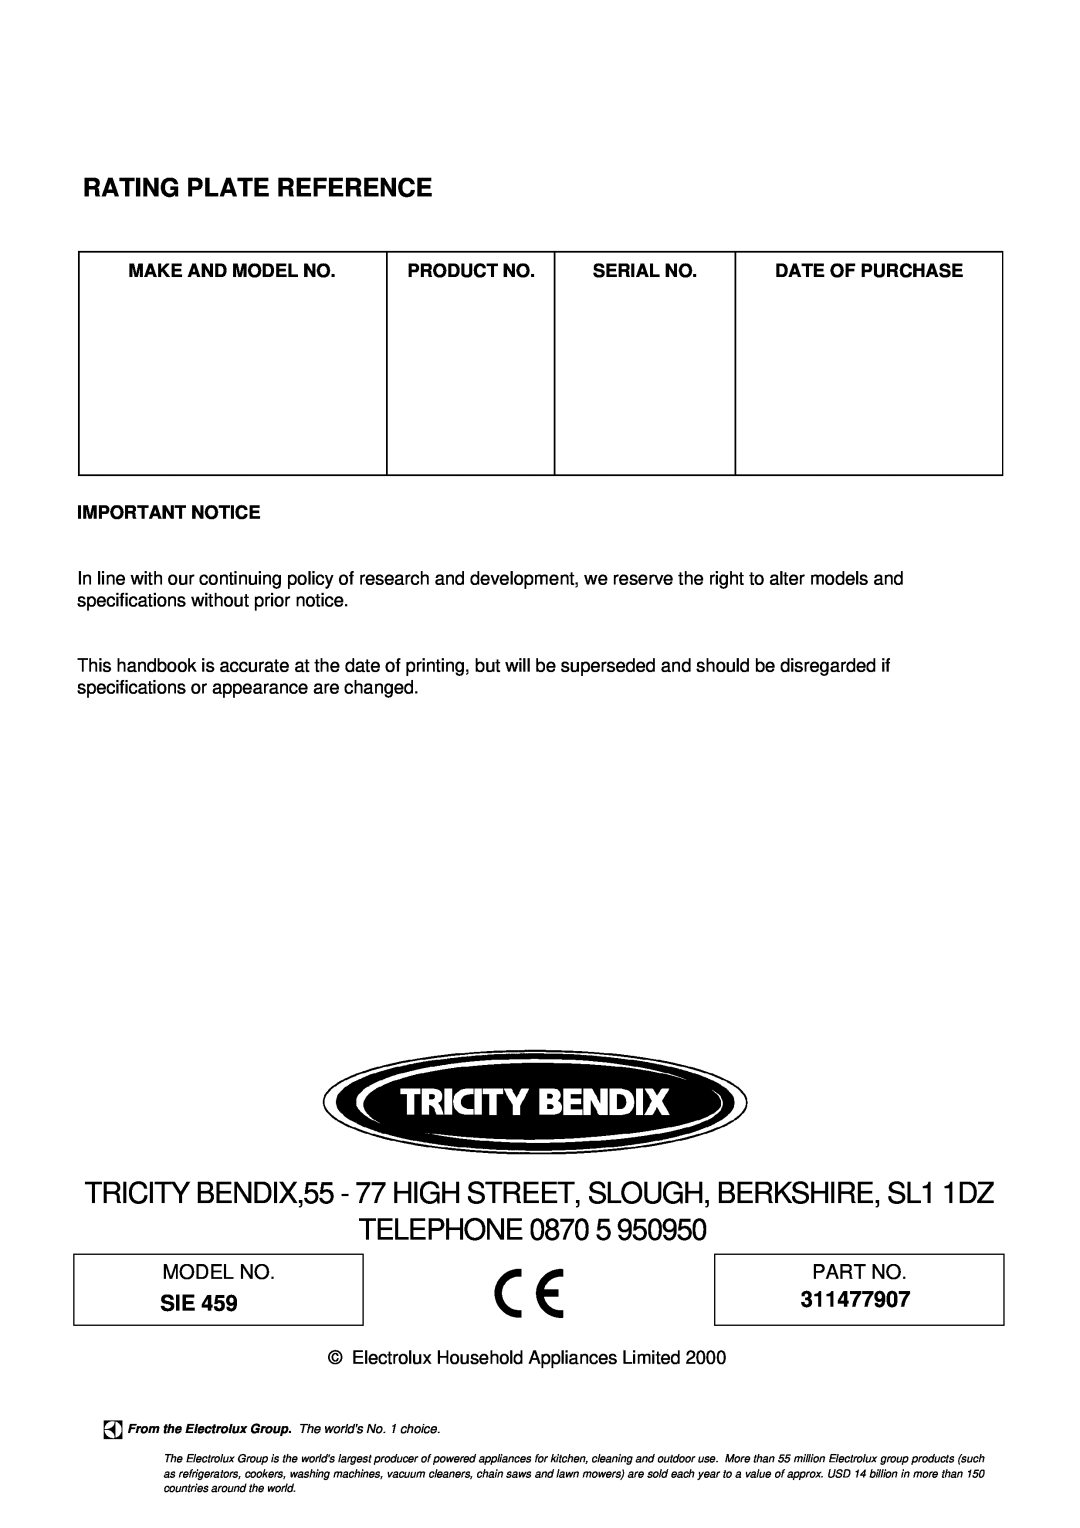 Tricity Bendix SIE 459 Rating Plate Reference, 311477907, Telephone, Make And Model No, Product No, Serial No 